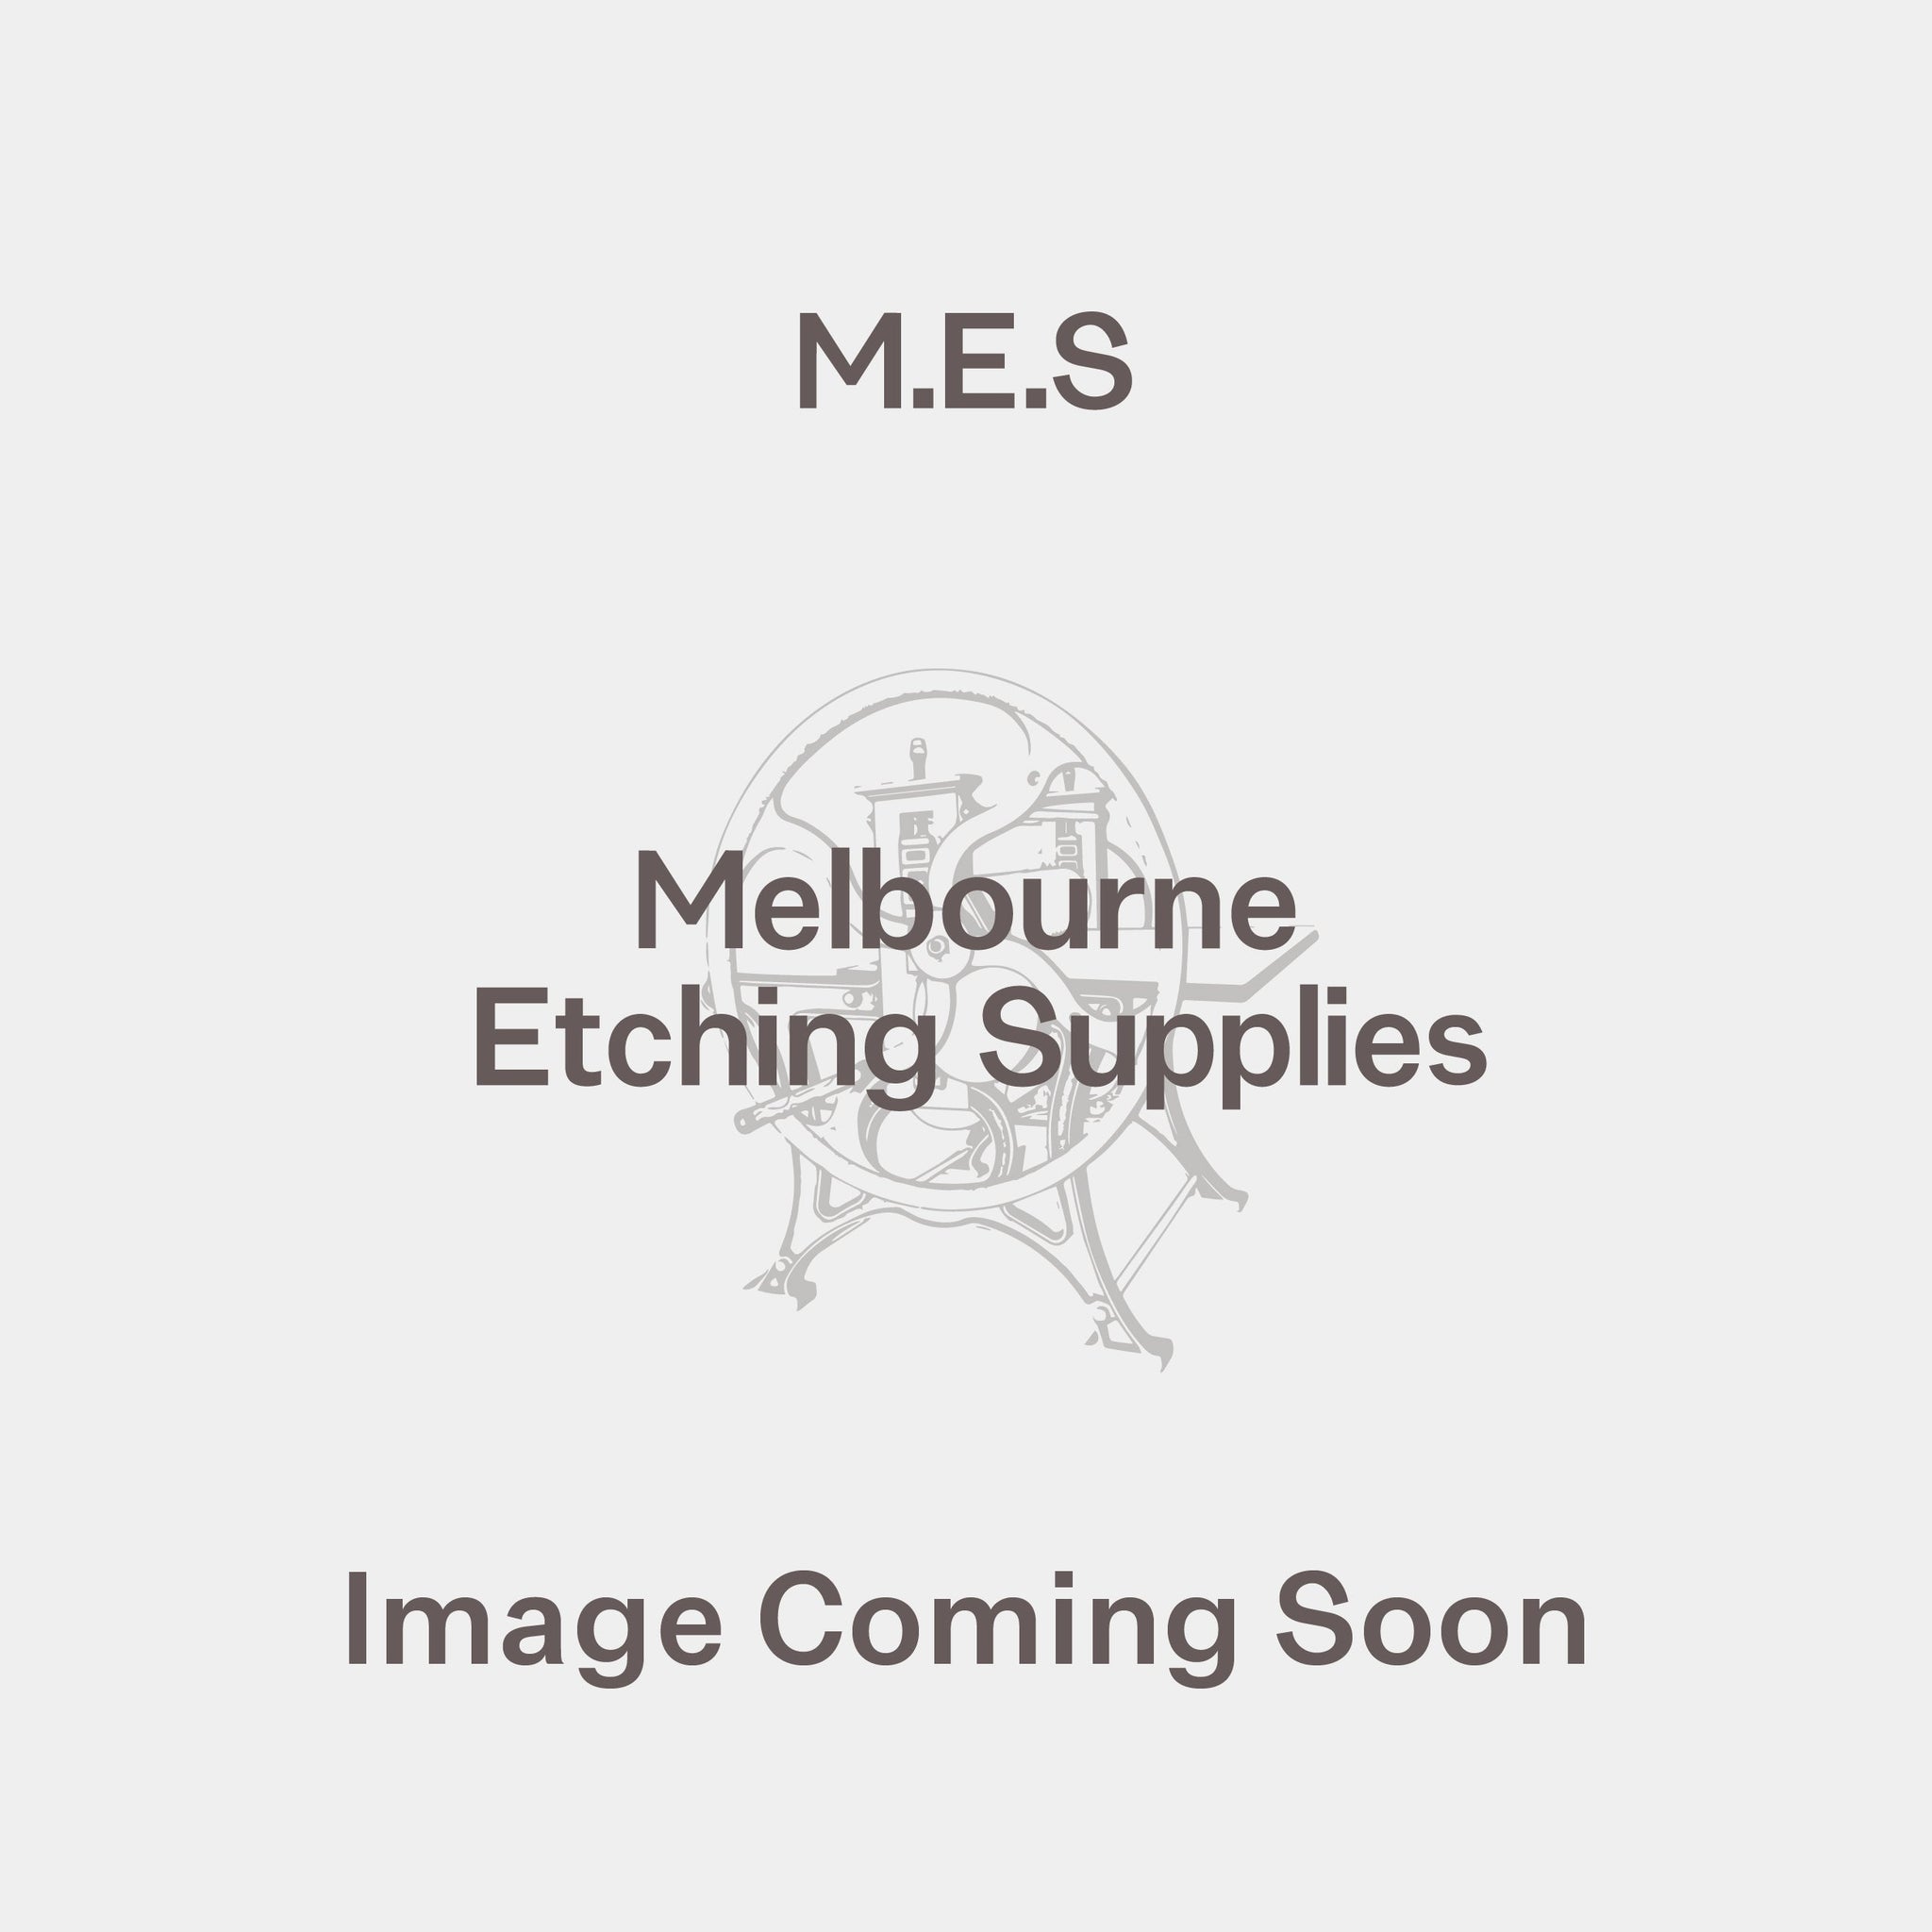 Grifold Swivel Knife #113 - Melbourne Etching Supplies